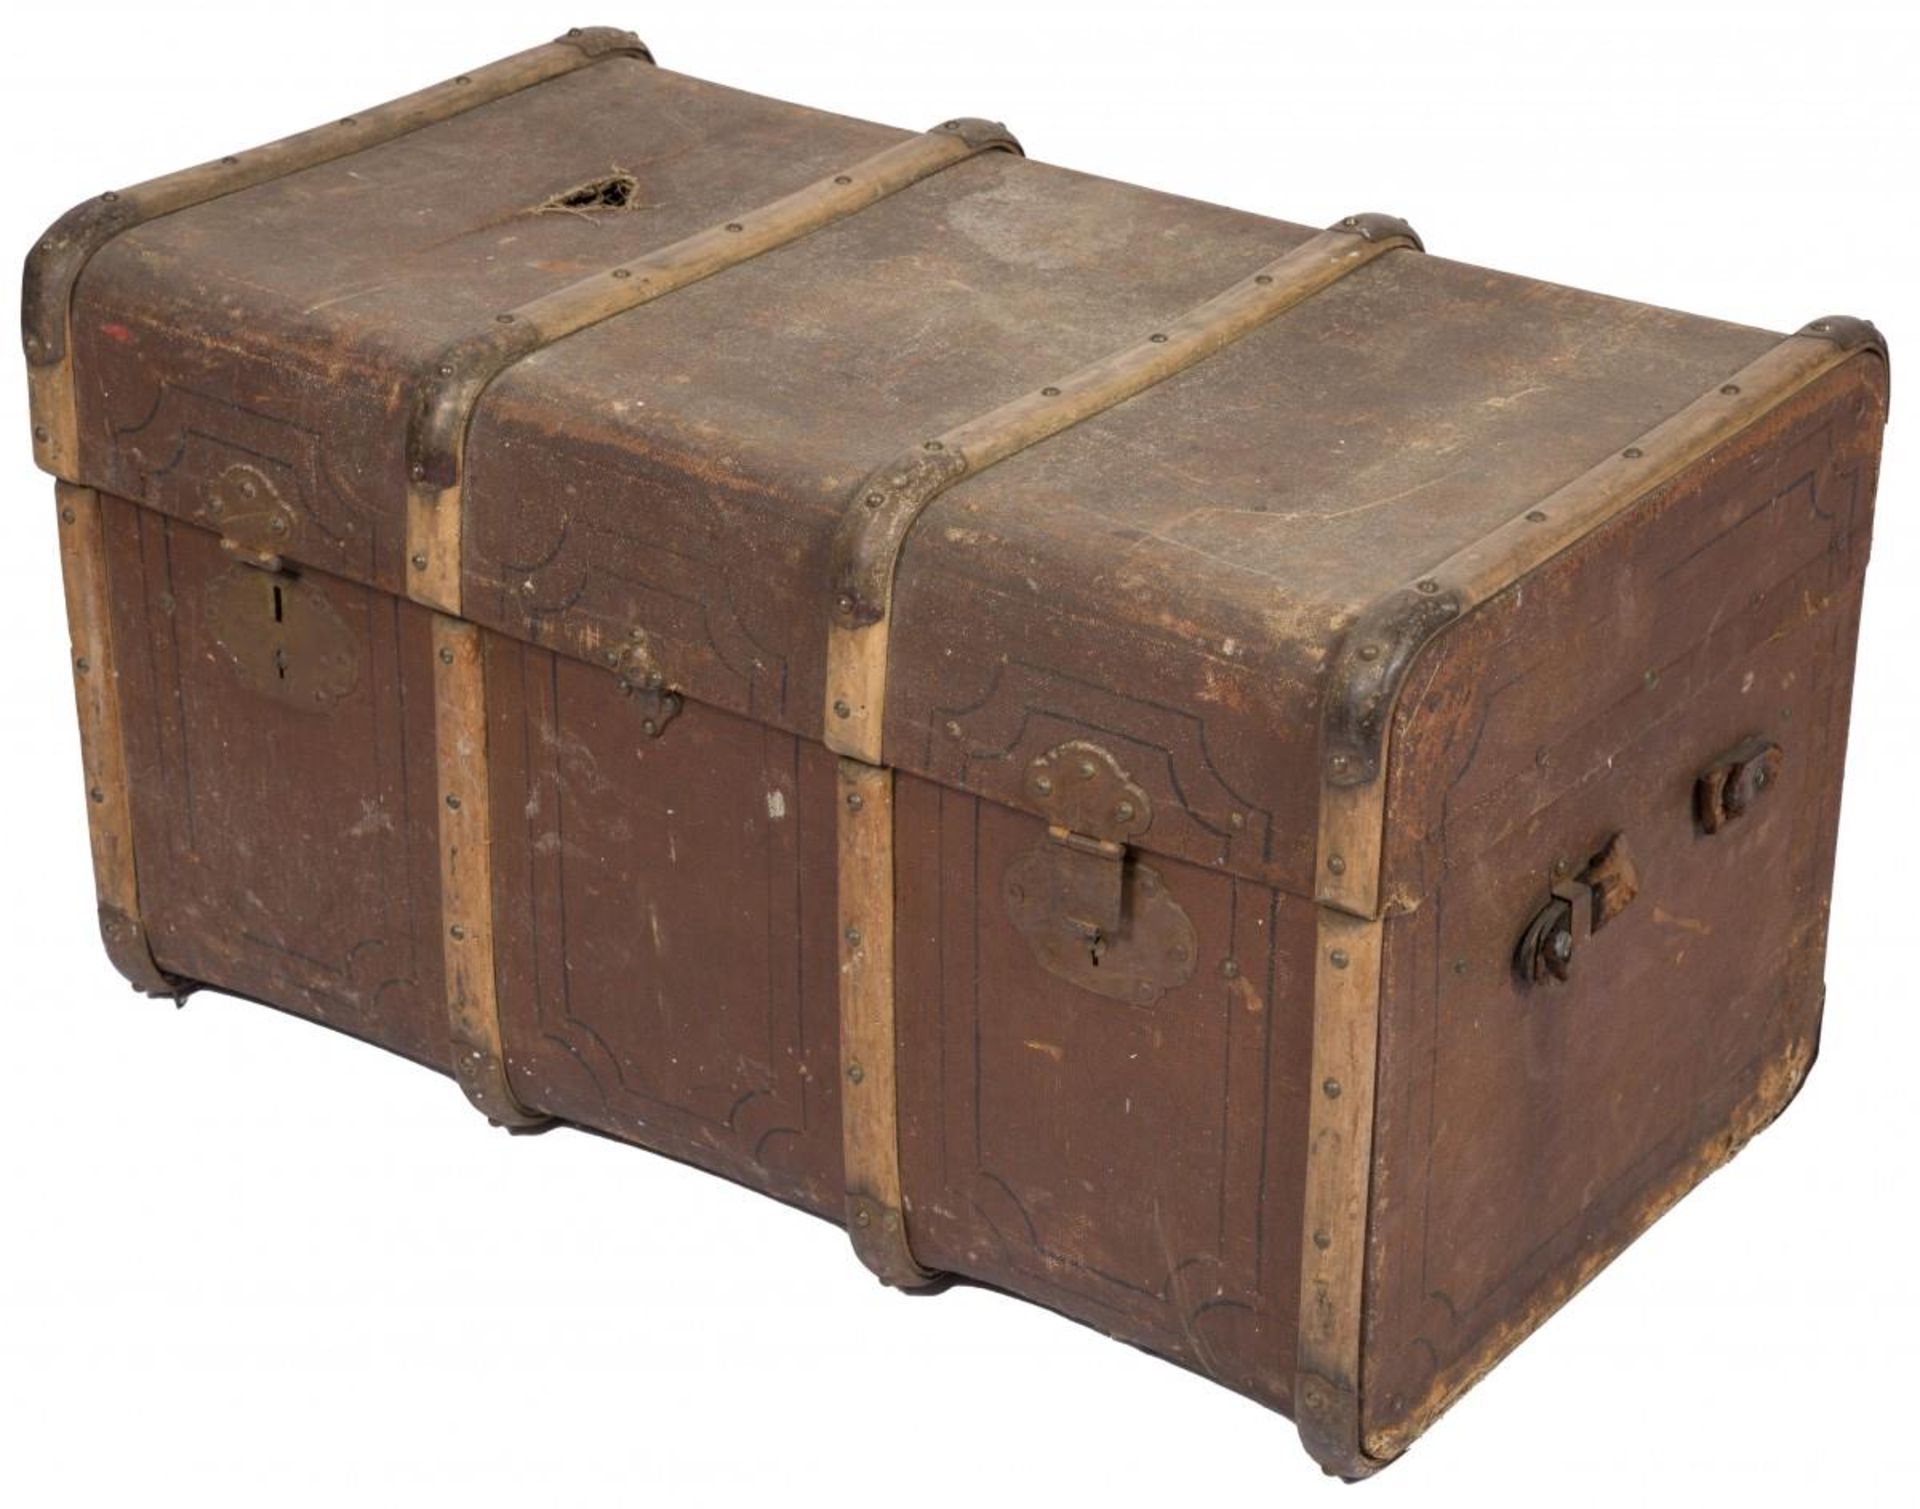 A wooden trunk / travel suitcase, France, early 20th century.